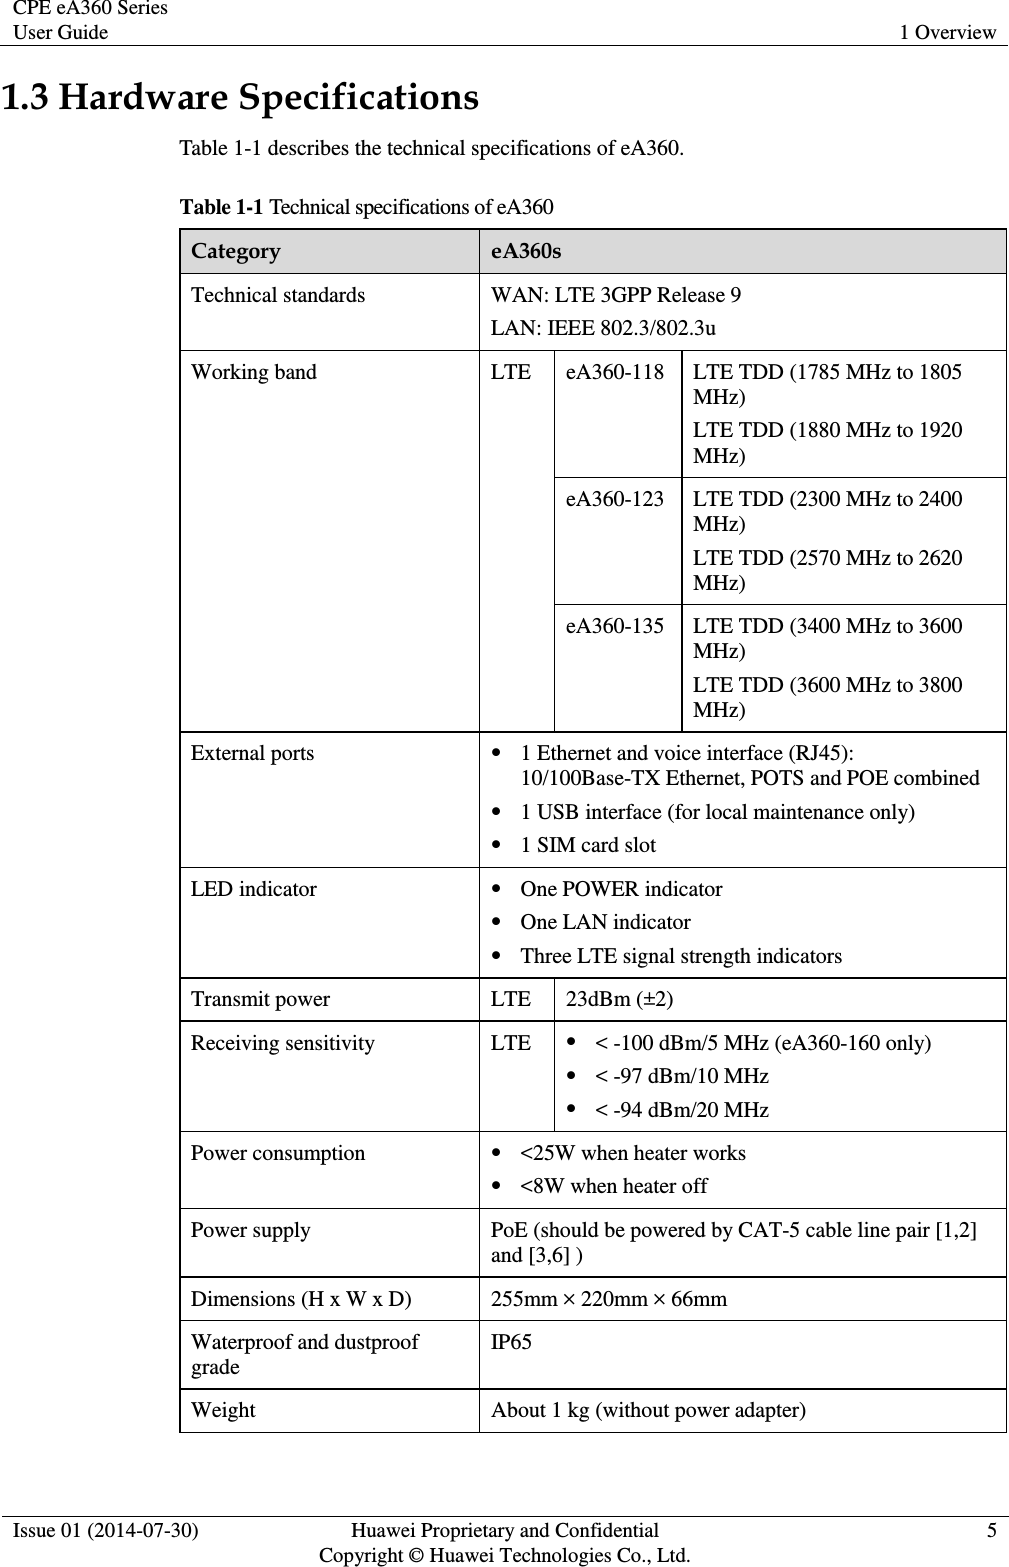 CPE eA360 Series User Guide 1 Overview  Issue 01 (2014-07-30) Huawei Proprietary and Confidential                                     Copyright © Huawei Technologies Co., Ltd. 5  1.3 Hardware Specifications Table 1-1 describes the technical specifications of eA360. Table 1-1 Technical specifications of eA360 Category eA360s Technical standards WAN: LTE 3GPP Release 9 LAN: IEEE 802.3/802.3u Working band LTE   eA360-118 LTE TDD (1785 MHz to 1805 MHz) LTE TDD (1880 MHz to 1920 MHz) eA360-123 LTE TDD (2300 MHz to 2400 MHz) LTE TDD (2570 MHz to 2620 MHz) eA360-135 LTE TDD (3400 MHz to 3600 MHz) LTE TDD (3600 MHz to 3800 MHz) External ports  1 Ethernet and voice interface (RJ45): 10/100Base-TX Ethernet, POTS and POE combined  1 USB interface (for local maintenance only)  1 SIM card slot LED indicator  One POWER indicator  One LAN indicator  Three LTE signal strength indicators Transmit power LTE 23dBm (±2) Receiving sensitivity LTE  &lt; -100 dBm/5 MHz (eA360-160 only)  &lt; -97 dBm/10 MHz  &lt; -94 dBm/20 MHz Power consumption  &lt;25W when heater works  &lt;8W when heater off Power supply PoE (should be powered by CAT-5 cable line pair [1,2] and [3,6] ) Dimensions (H x W x D) 255mm × 220mm × 66mm Waterproof and dustproof grade IP65 Weight About 1 kg (without power adapter) 